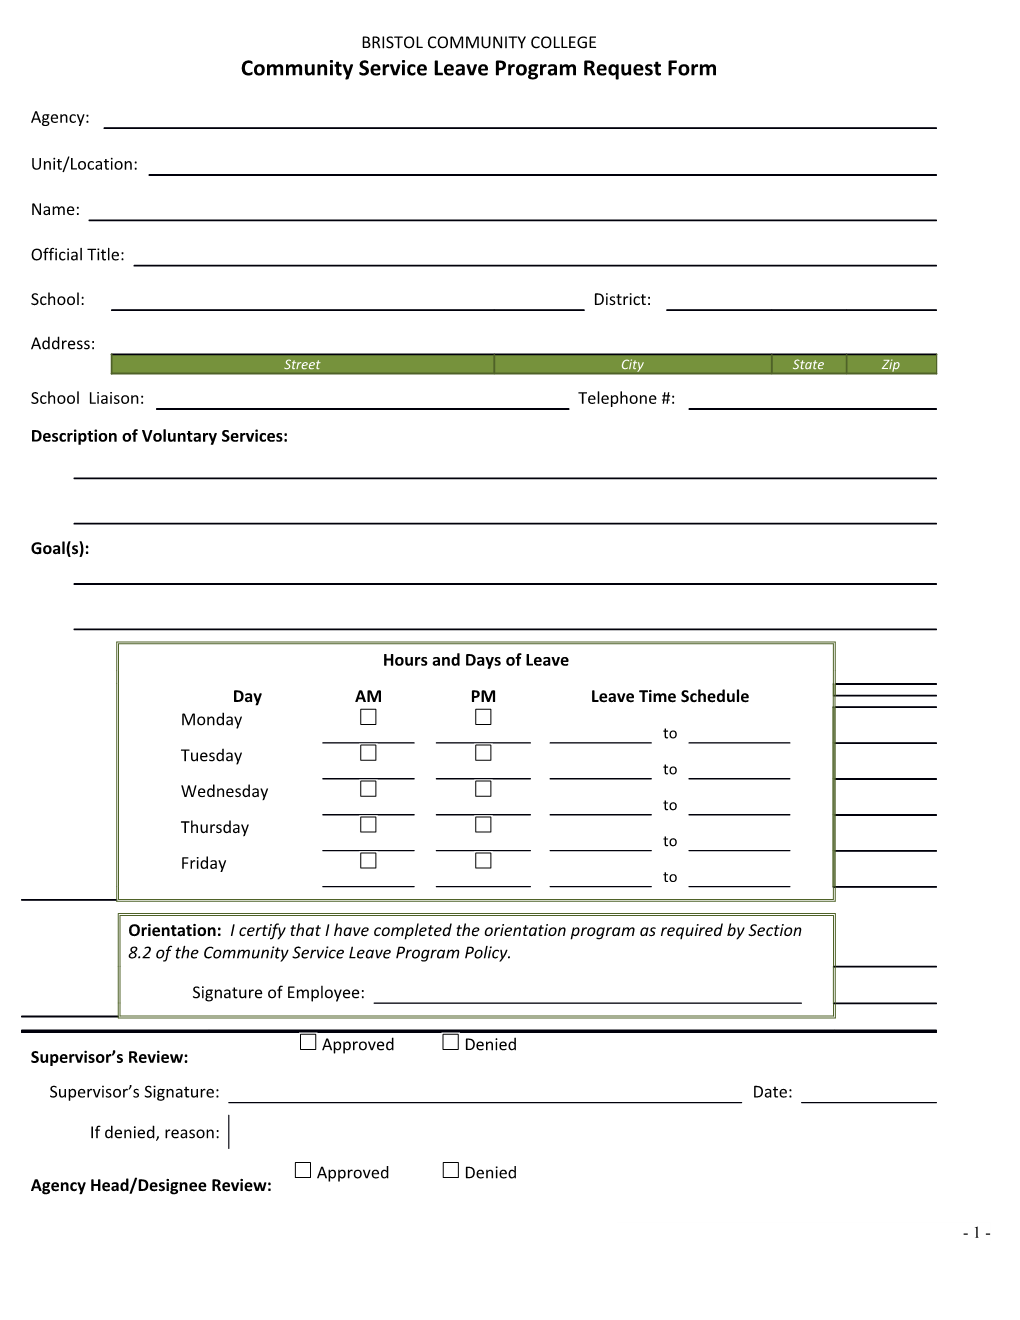 You Should Submit the Original of This Signed Form to the Human Resources Office